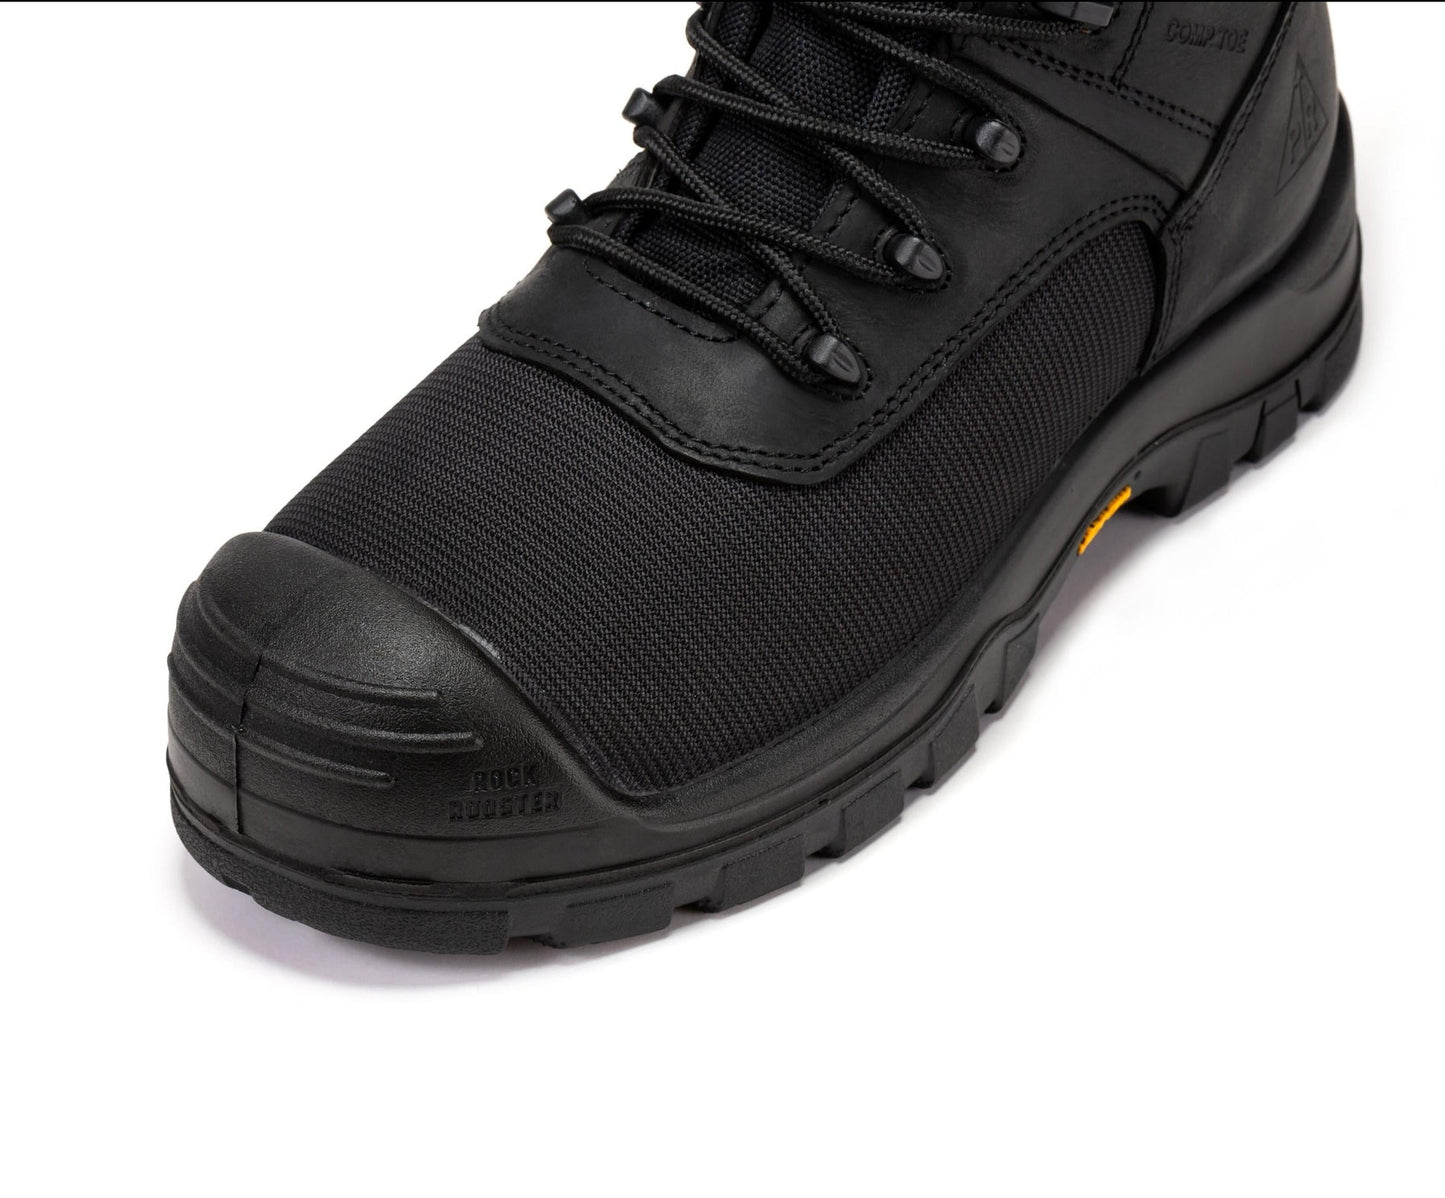 8” Waterproof Composite Toe Work Boots (CSA Approved) - The Beaufort